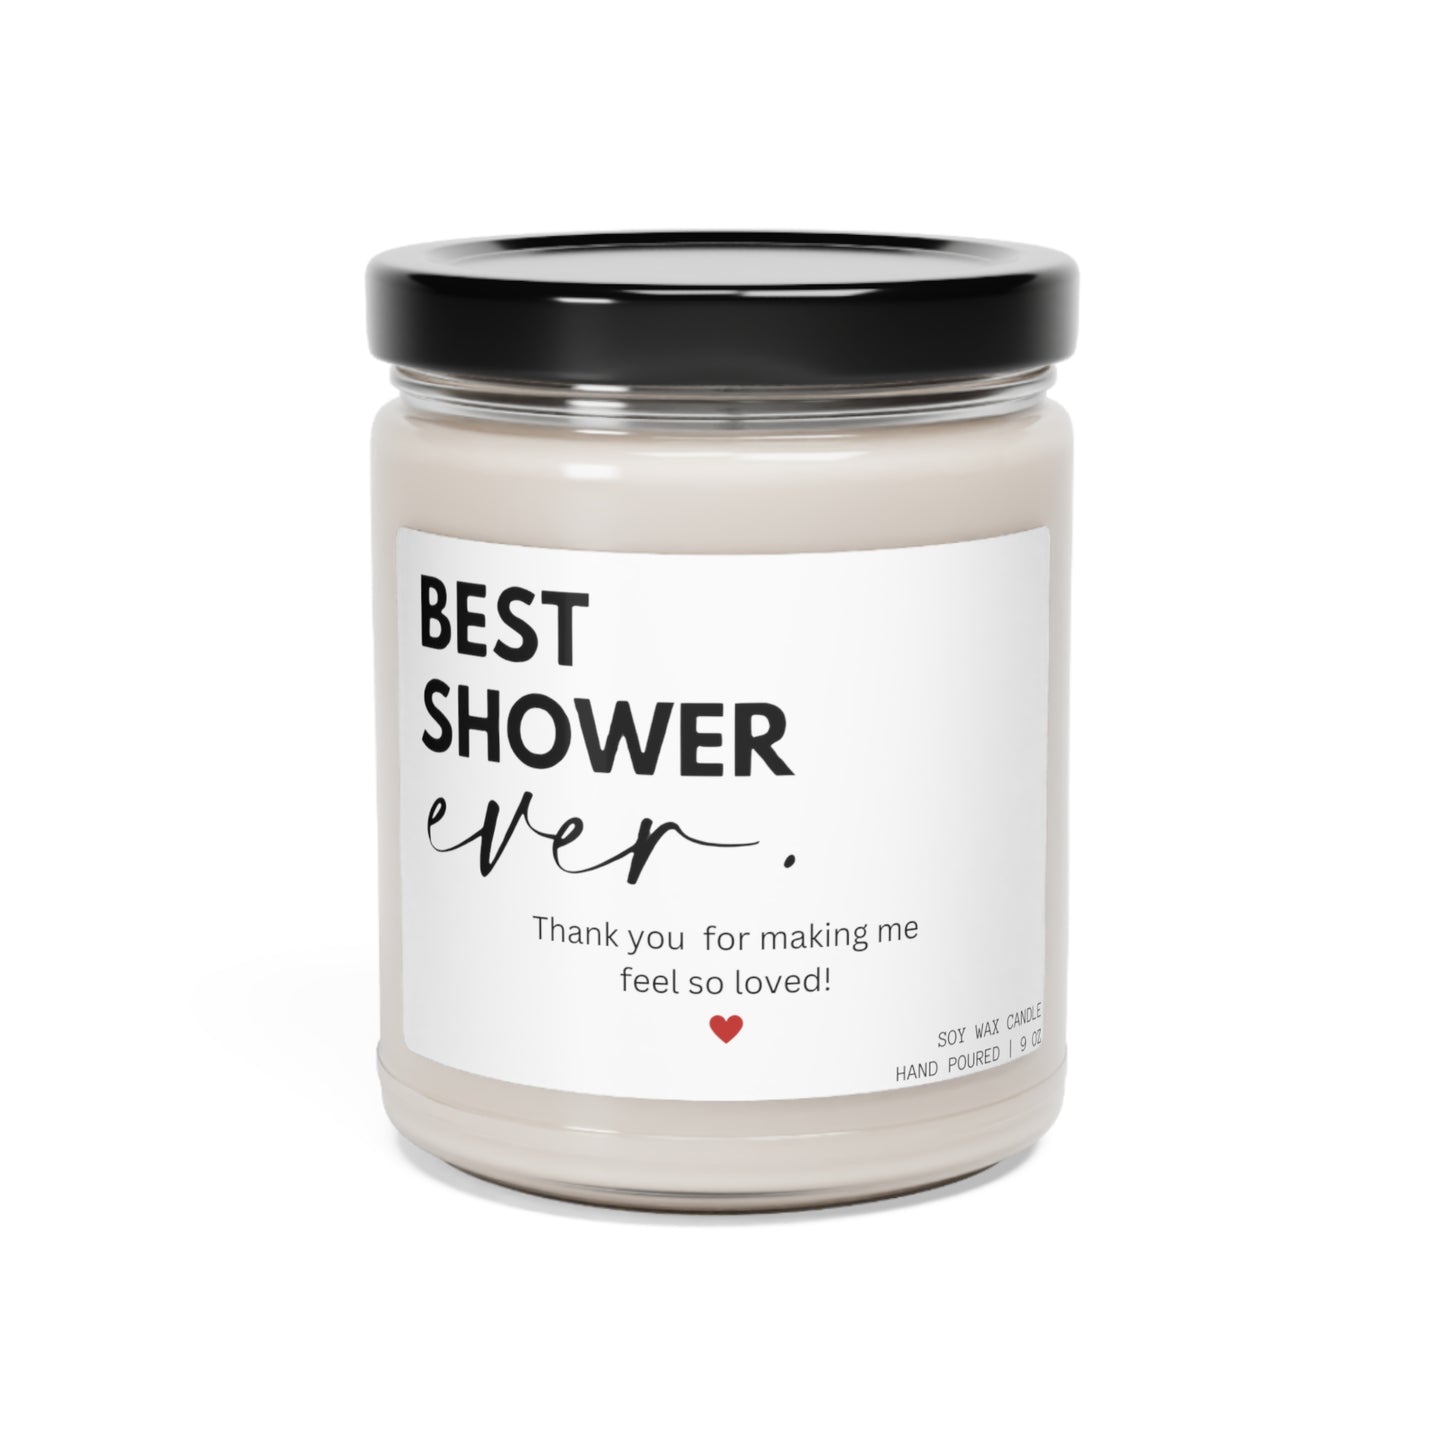 Best Shower Ever Baby Shower Gift Candle, Scented Soy Candle for Her